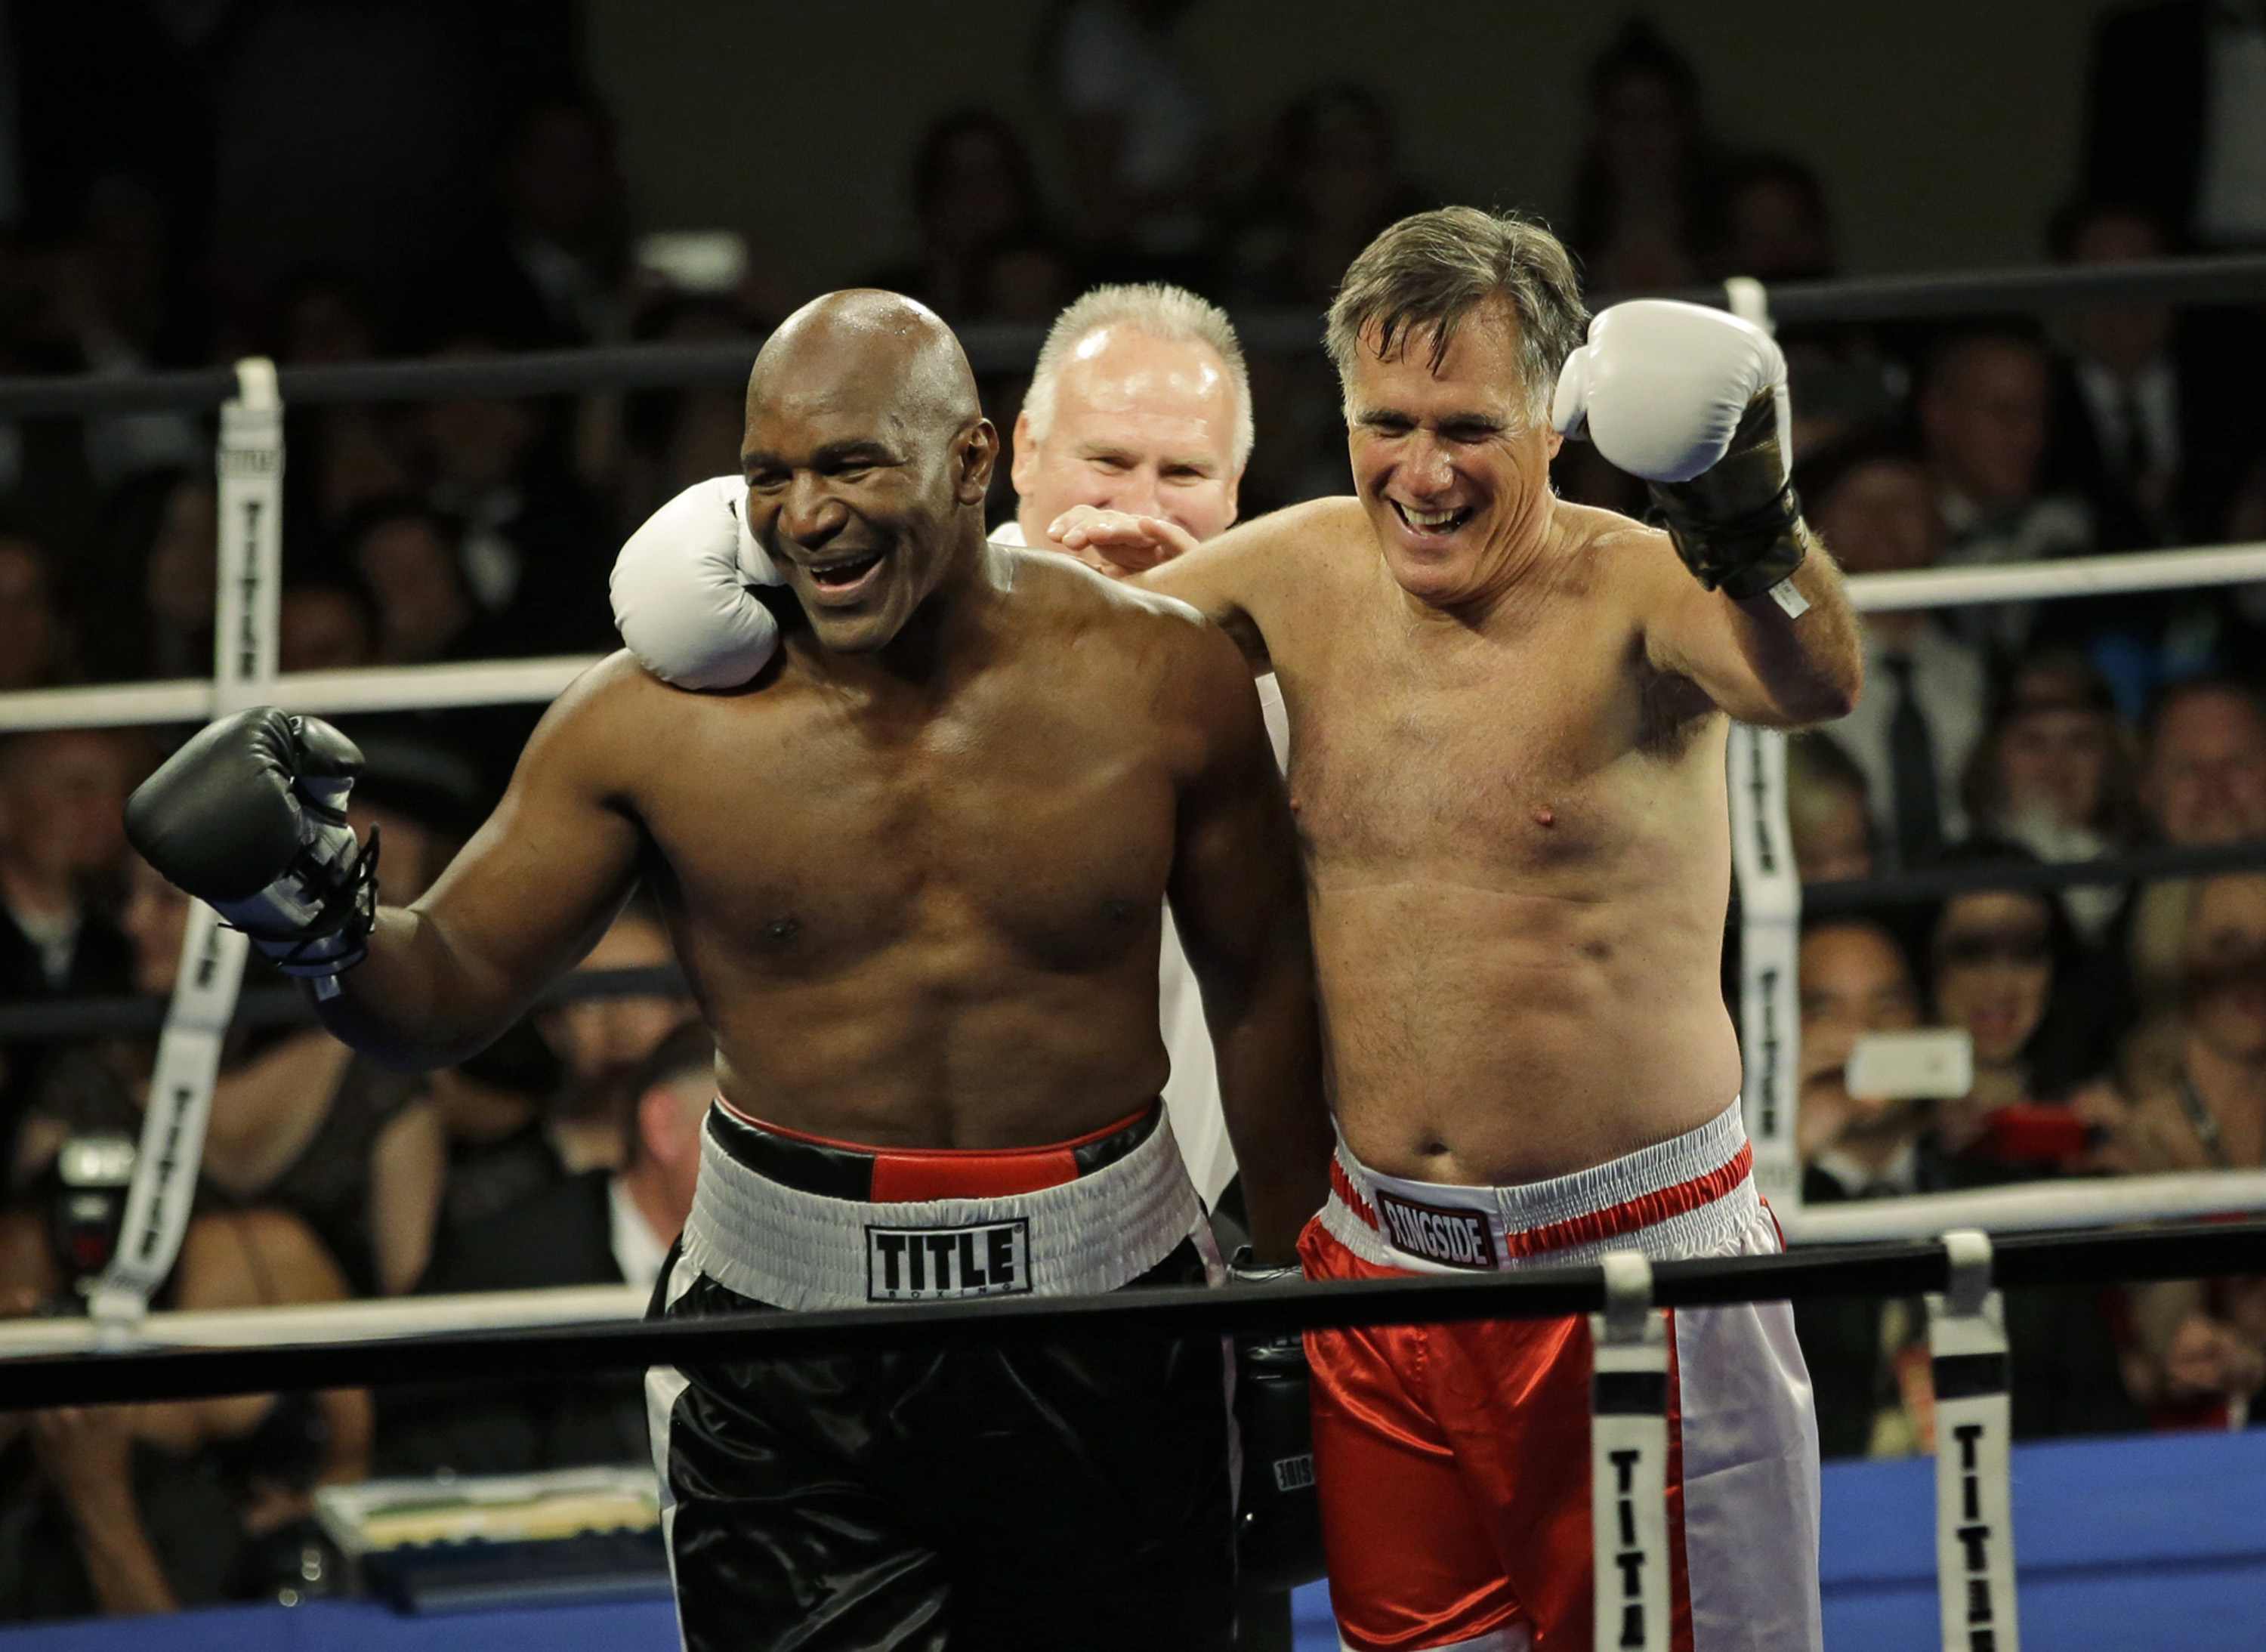 Former Republican presidential candidate Mitt Romney, right, celebrates with five-time heavyweight boxing champion Evander Holyfield following a charity fight night event on May 15, 2015, in Salt Lake City.